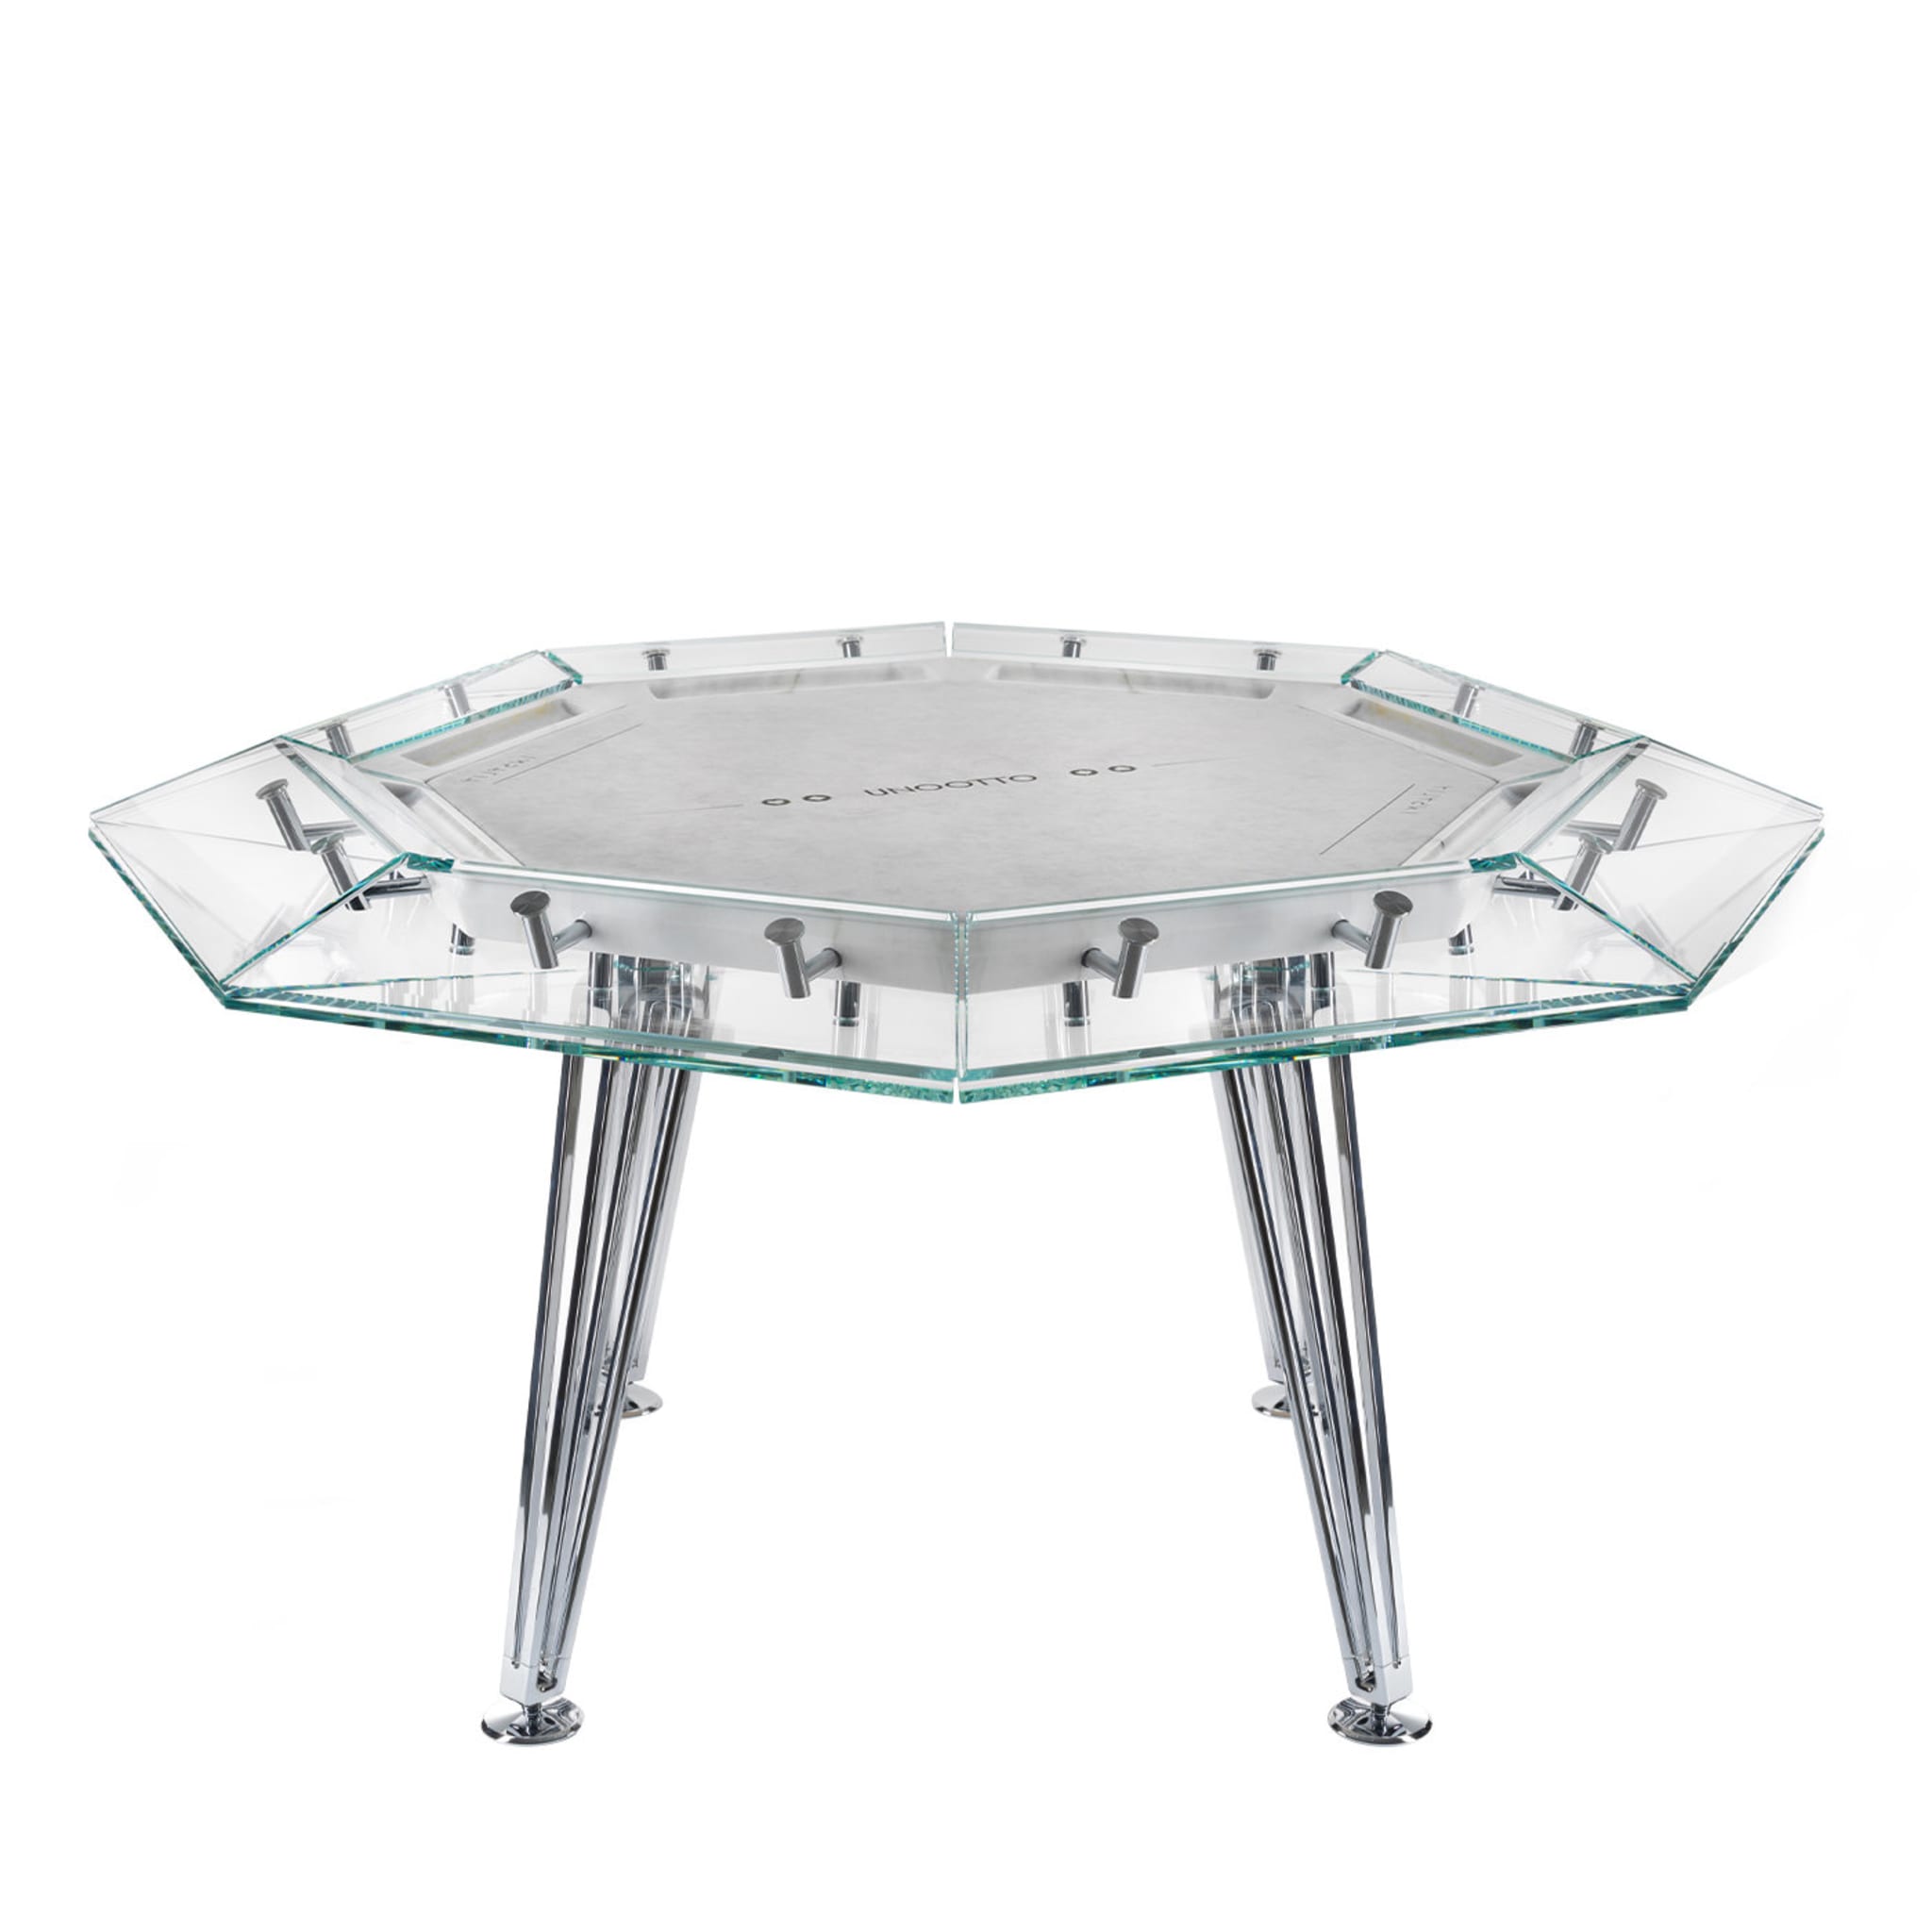 Unootto 8 Player Marble Edition White Poker Table - Vue principale